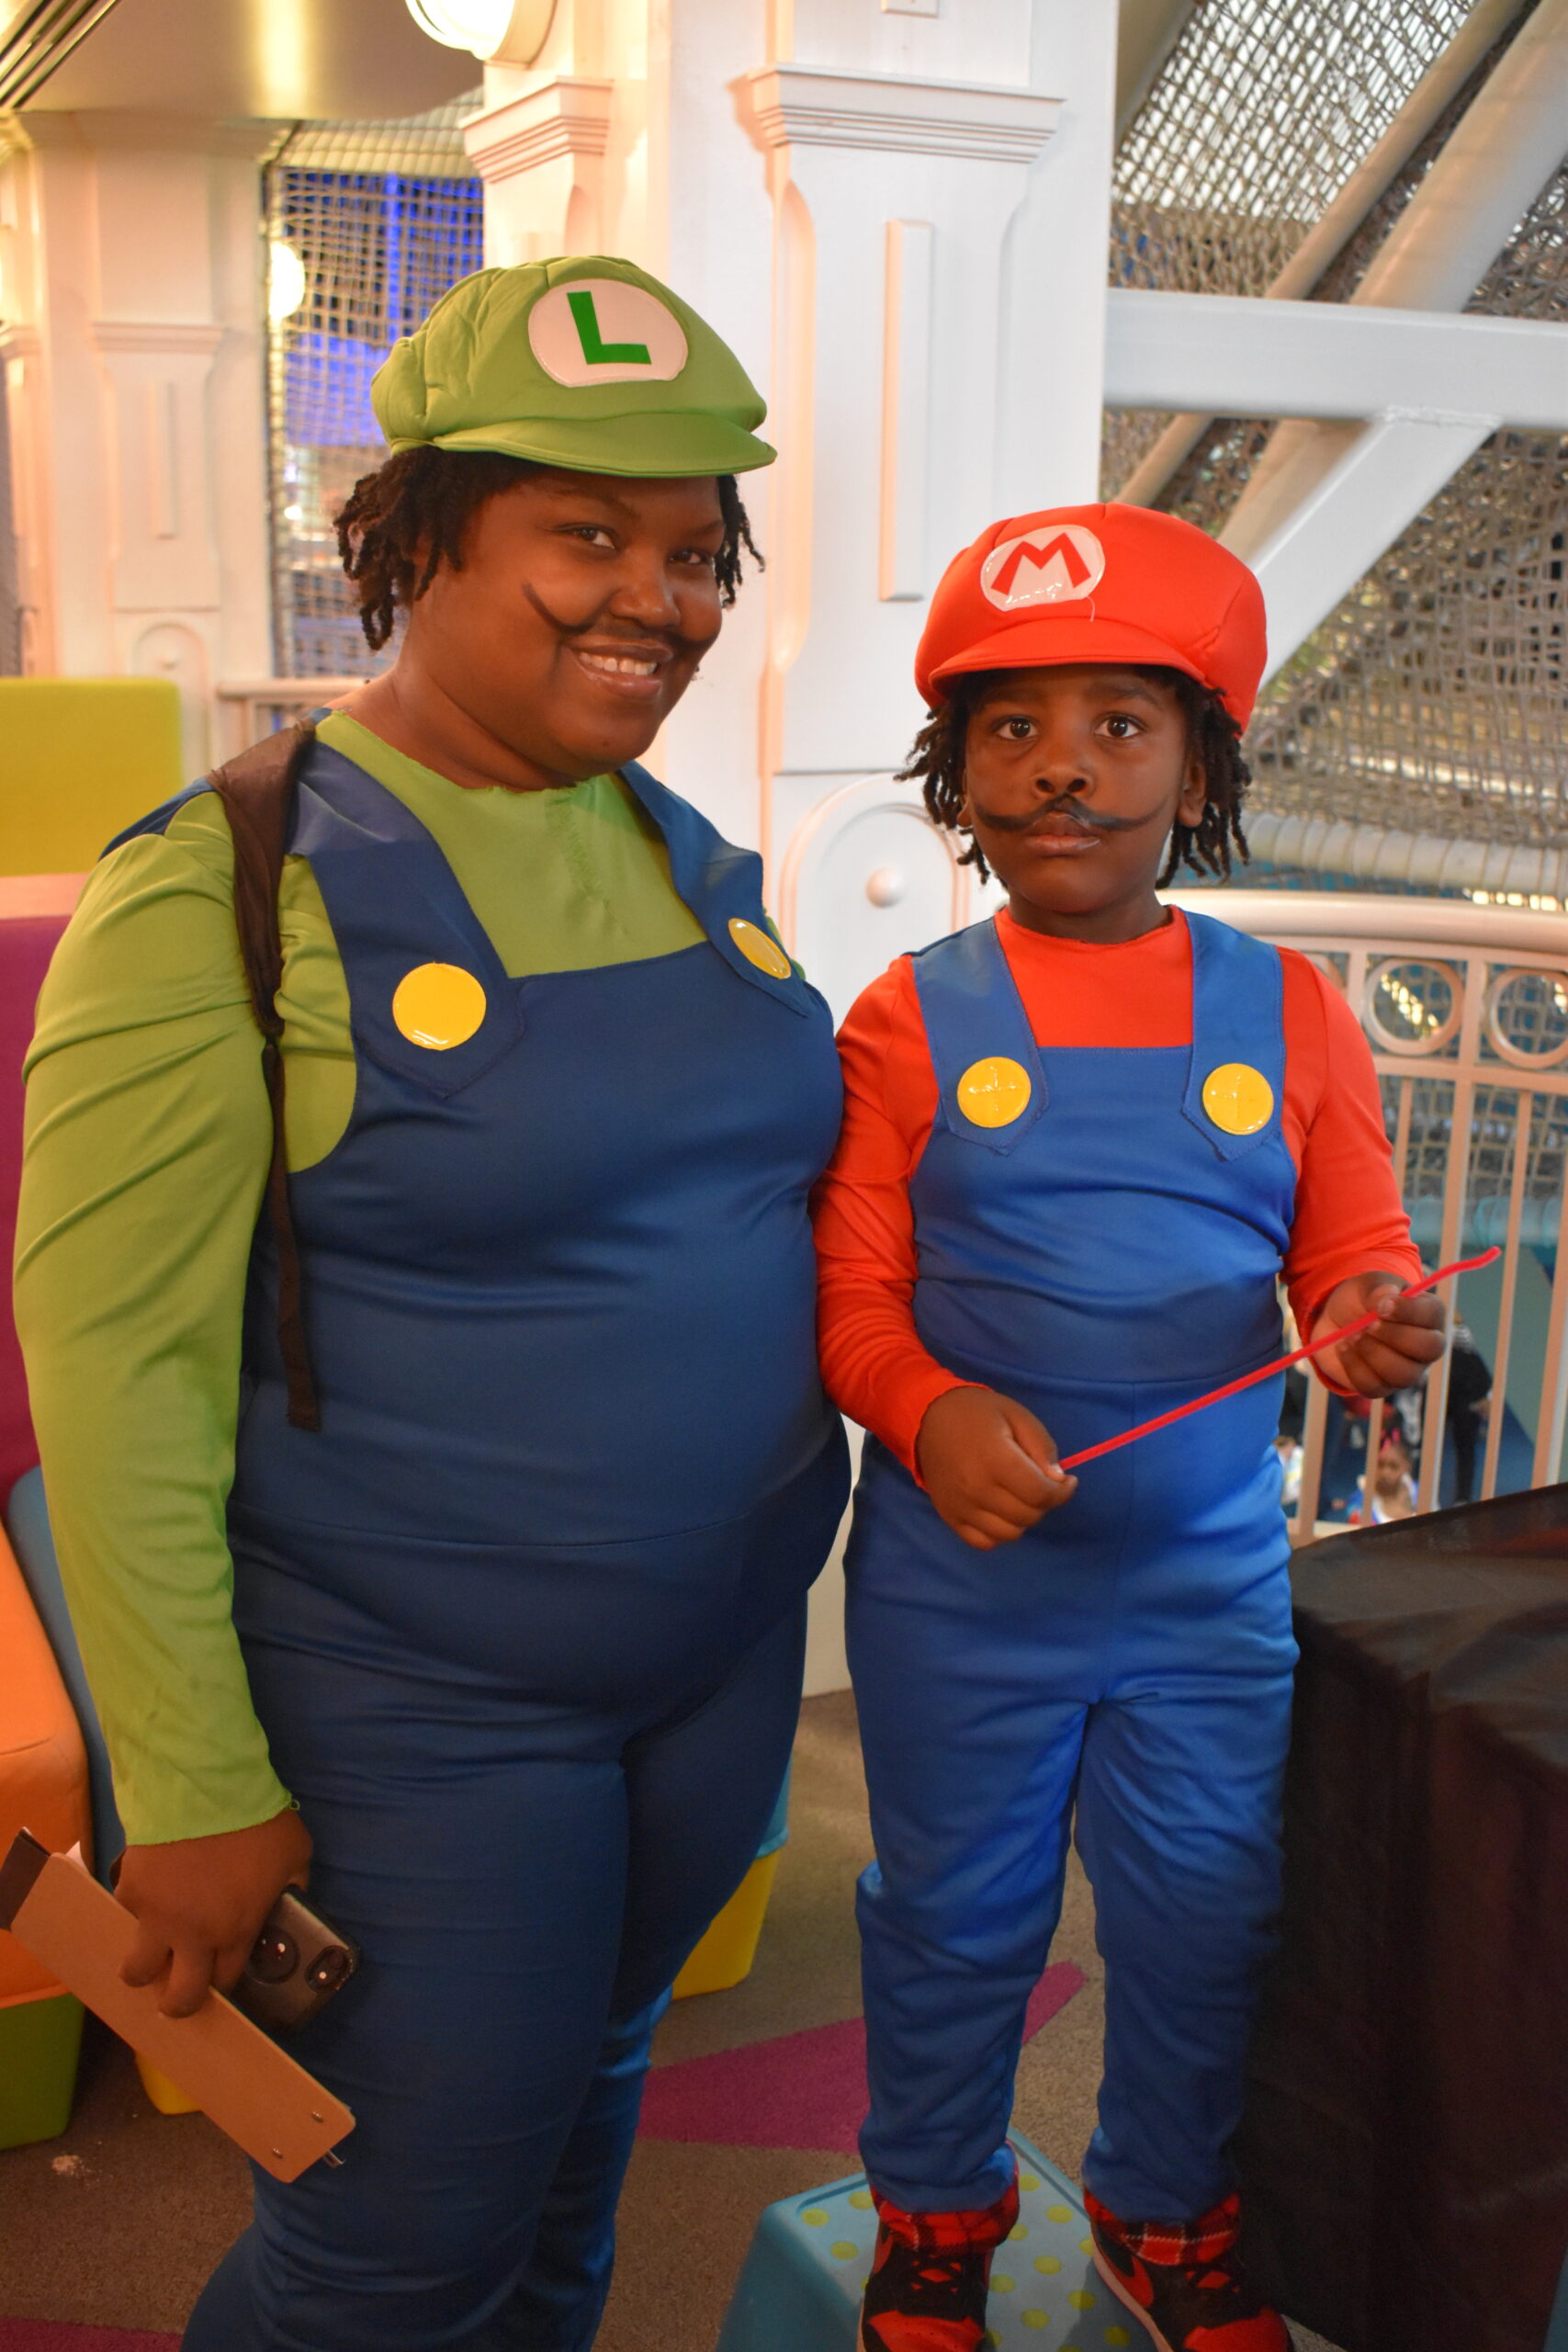 A mom and son are dressed as Luigi and Mario